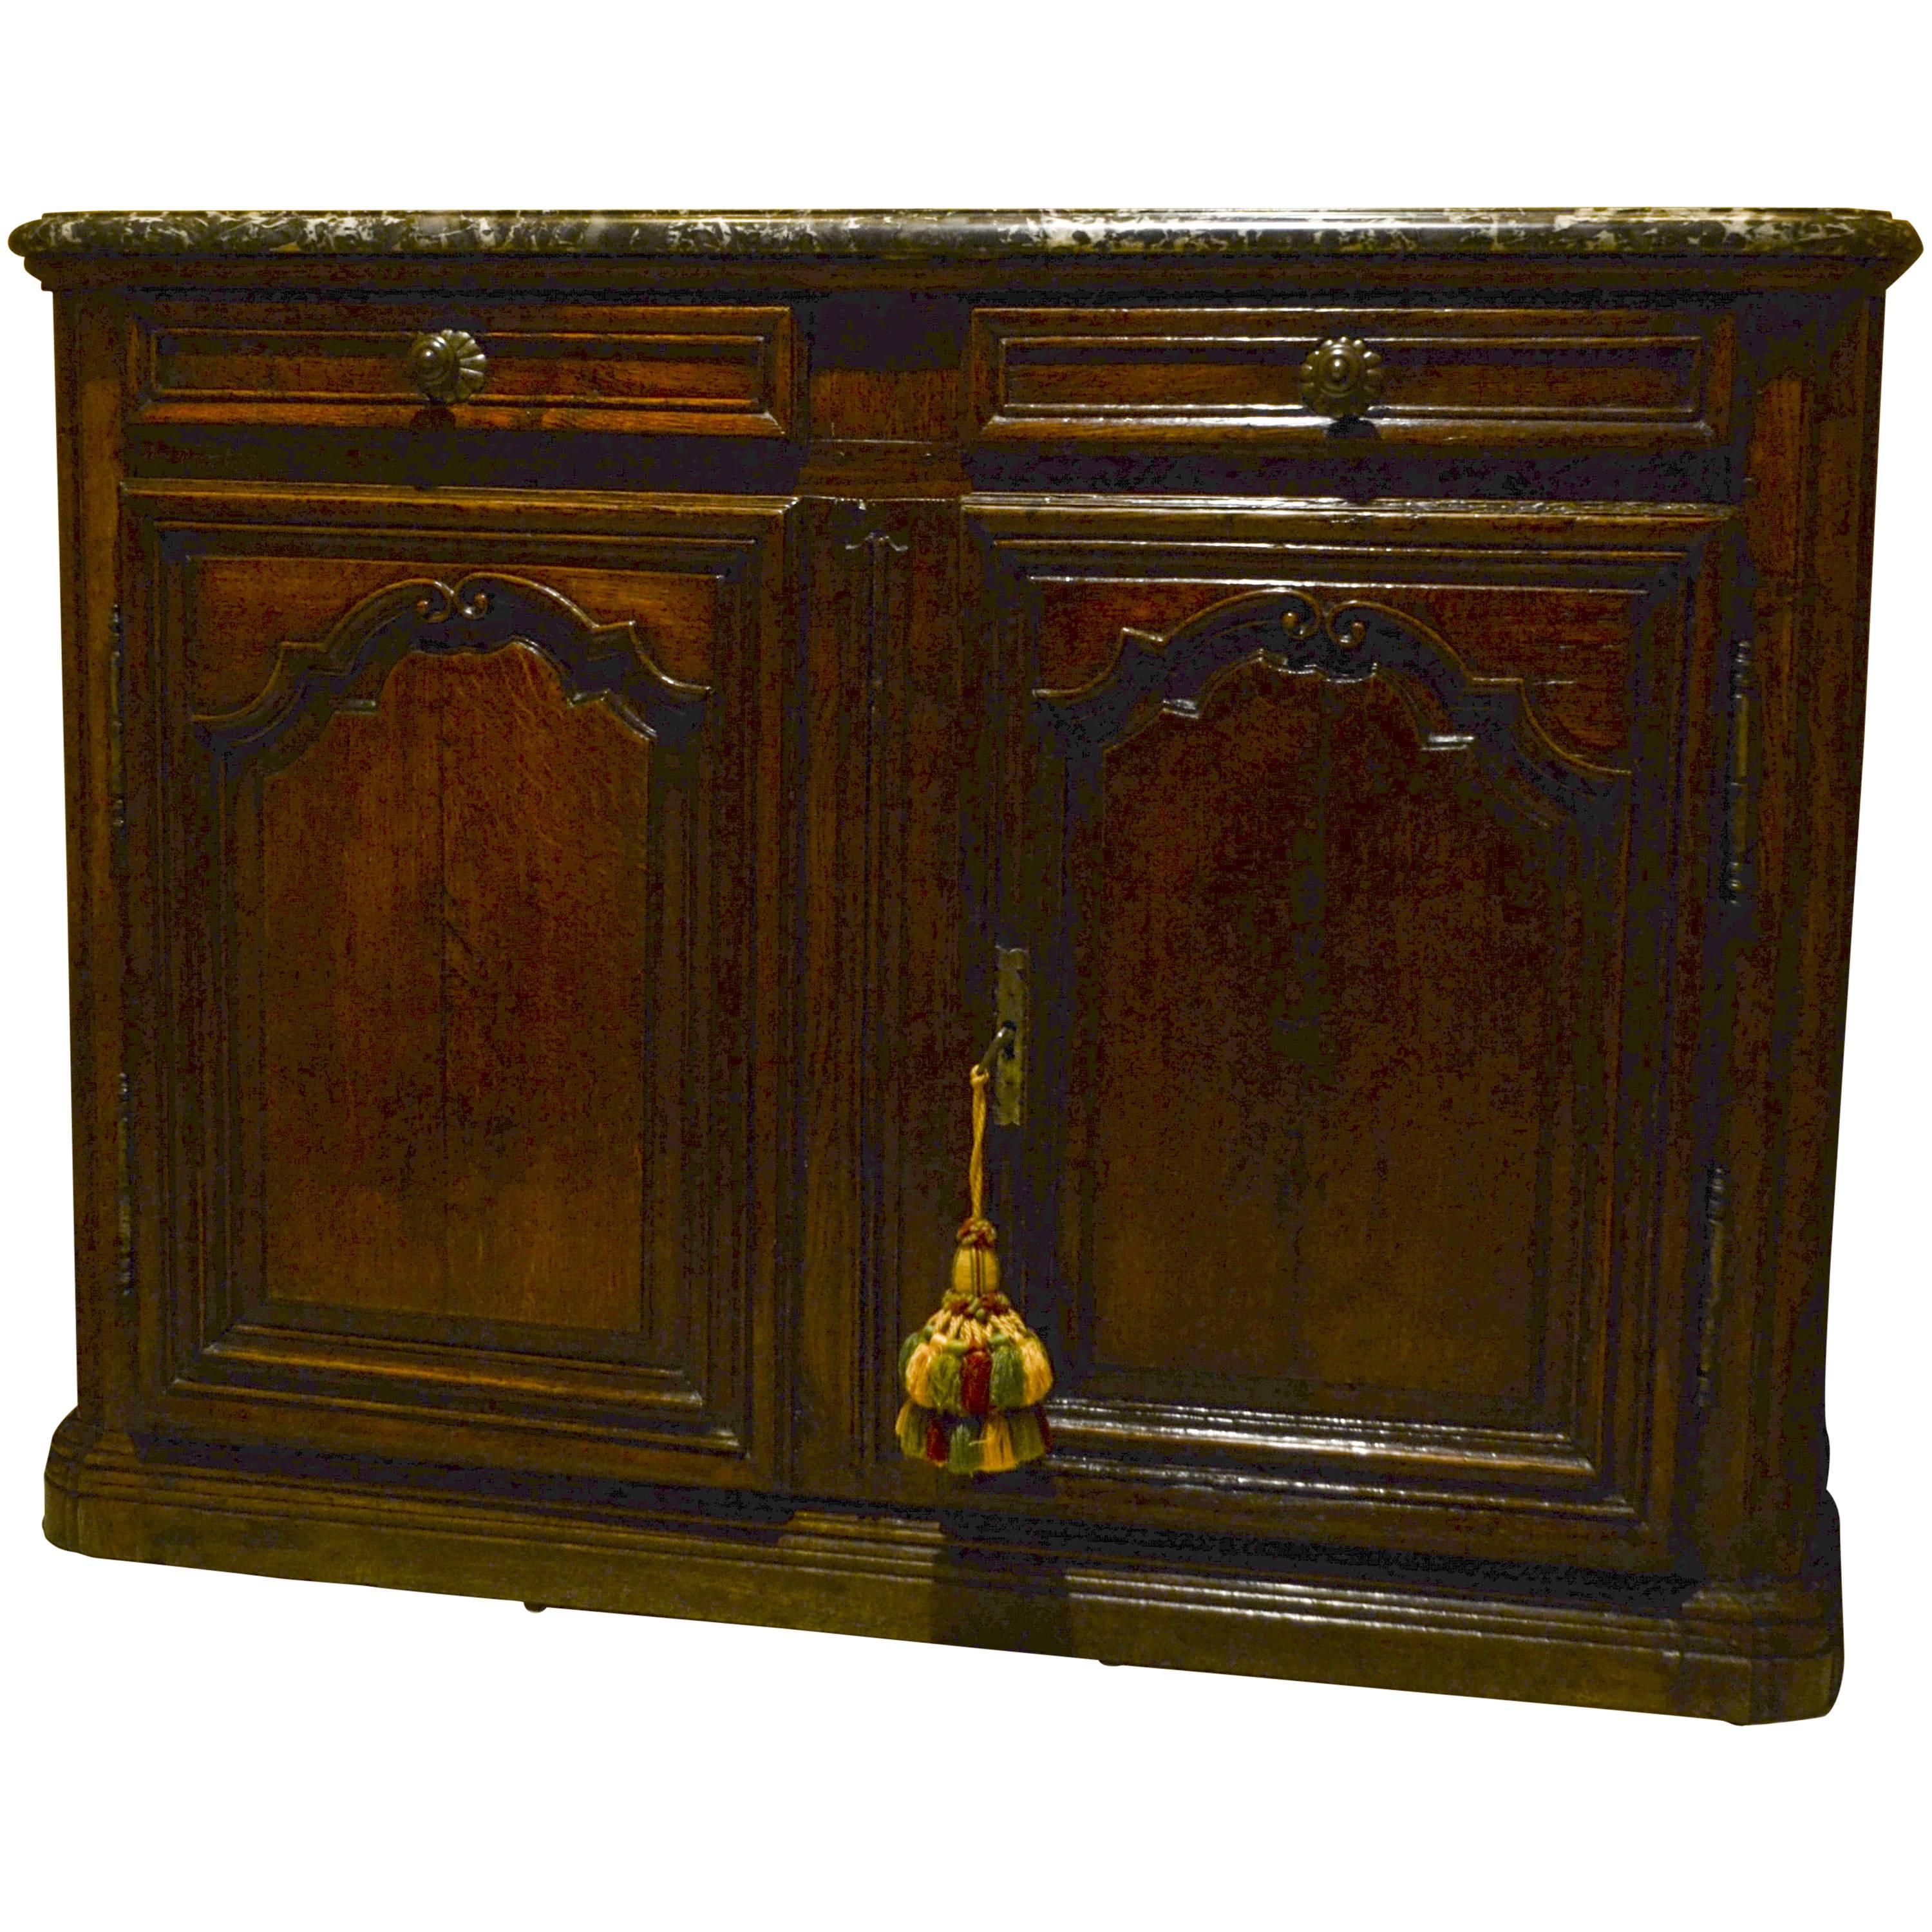 Louis XIV Walnut Buffet, circa Late 17th Century with Dropped Sink